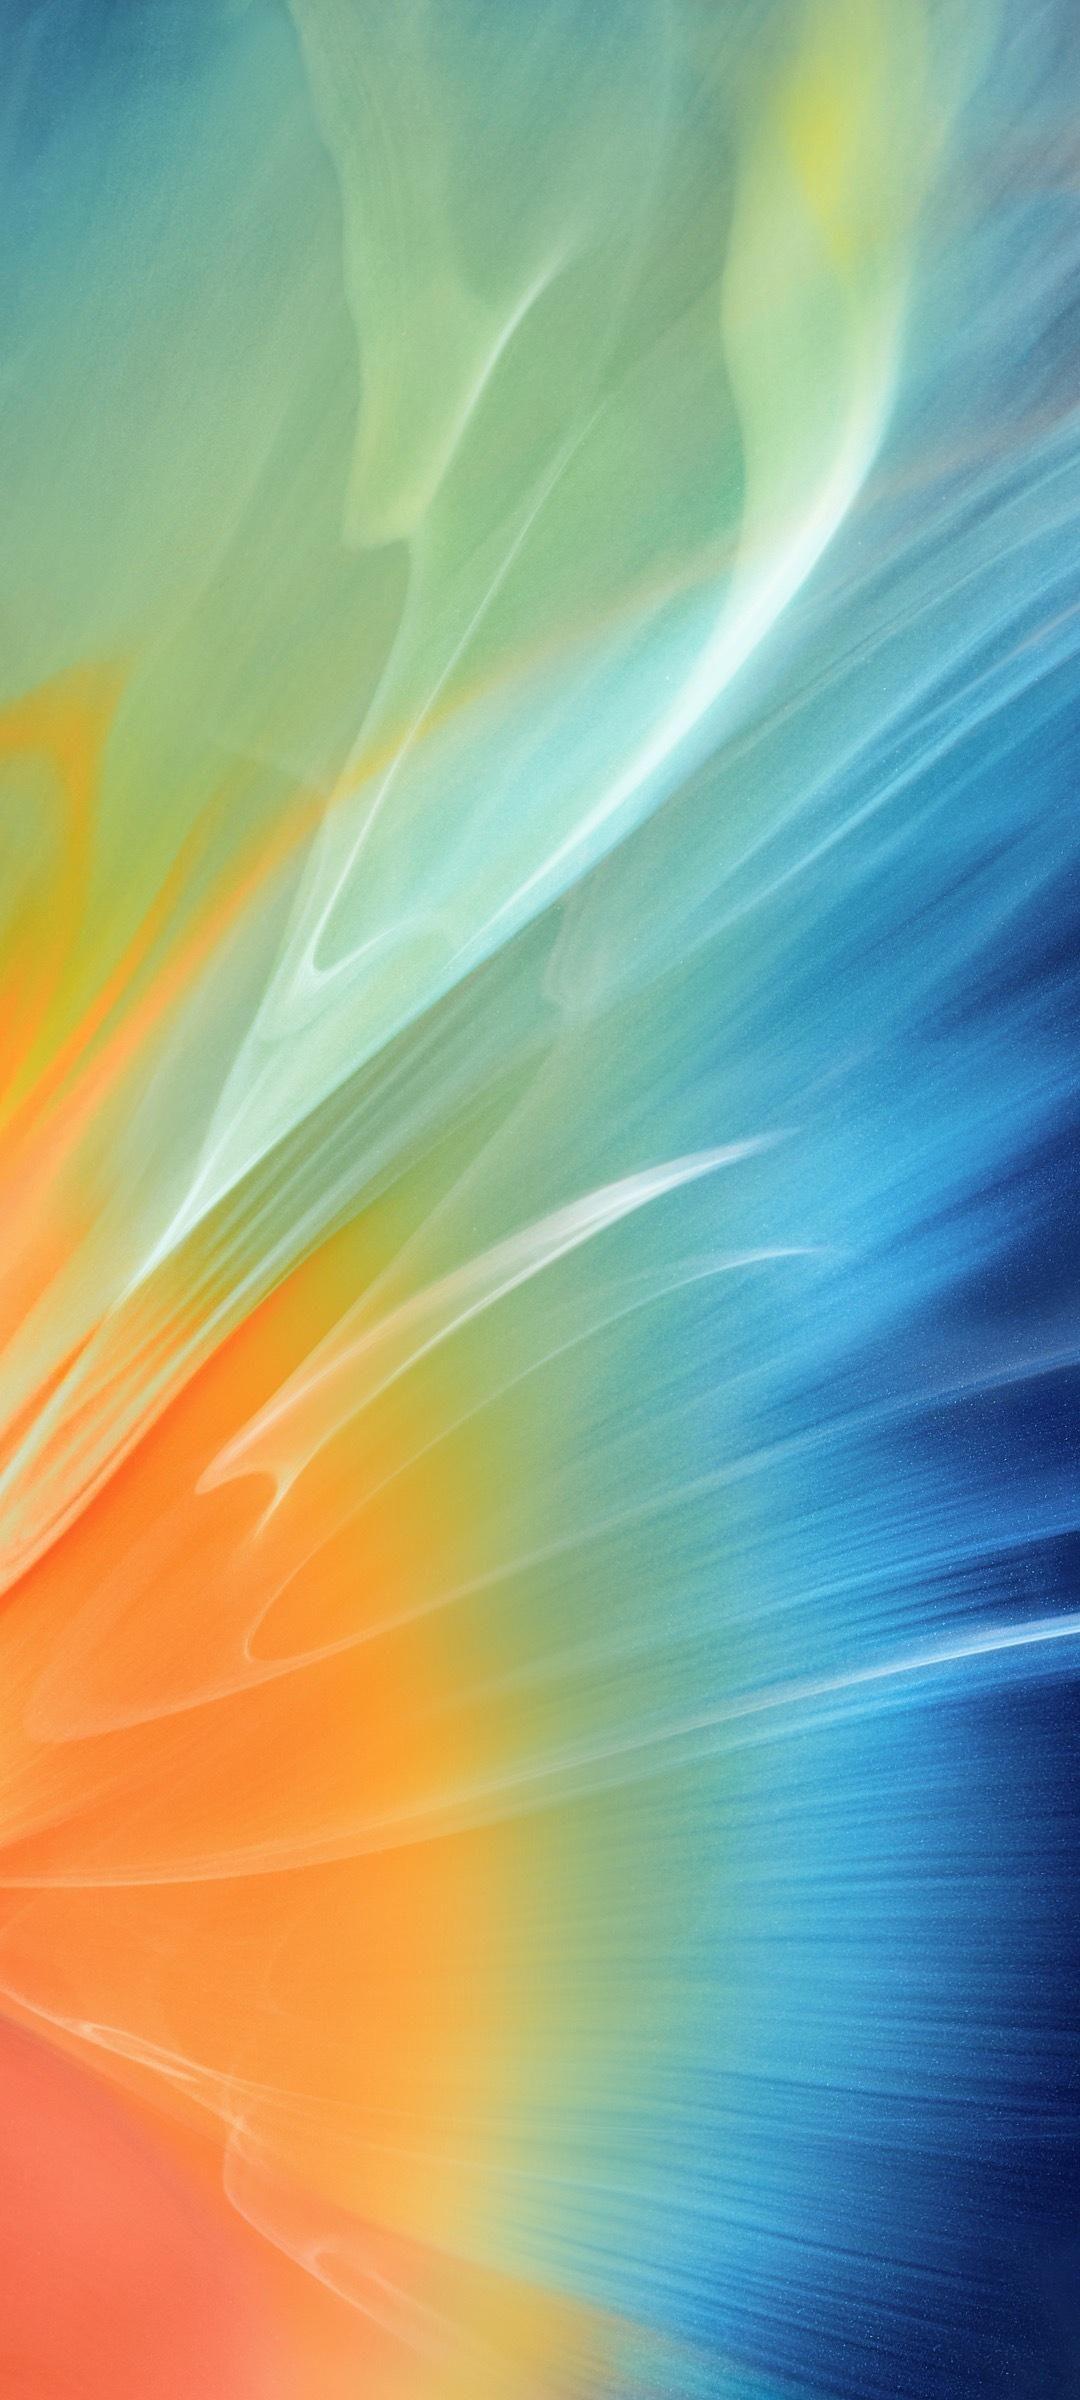 1080 x 2400 · jpeg - Huawei Phone Wallpapers in 2020 | Stock wallpaper, Abstract wallpaper ...